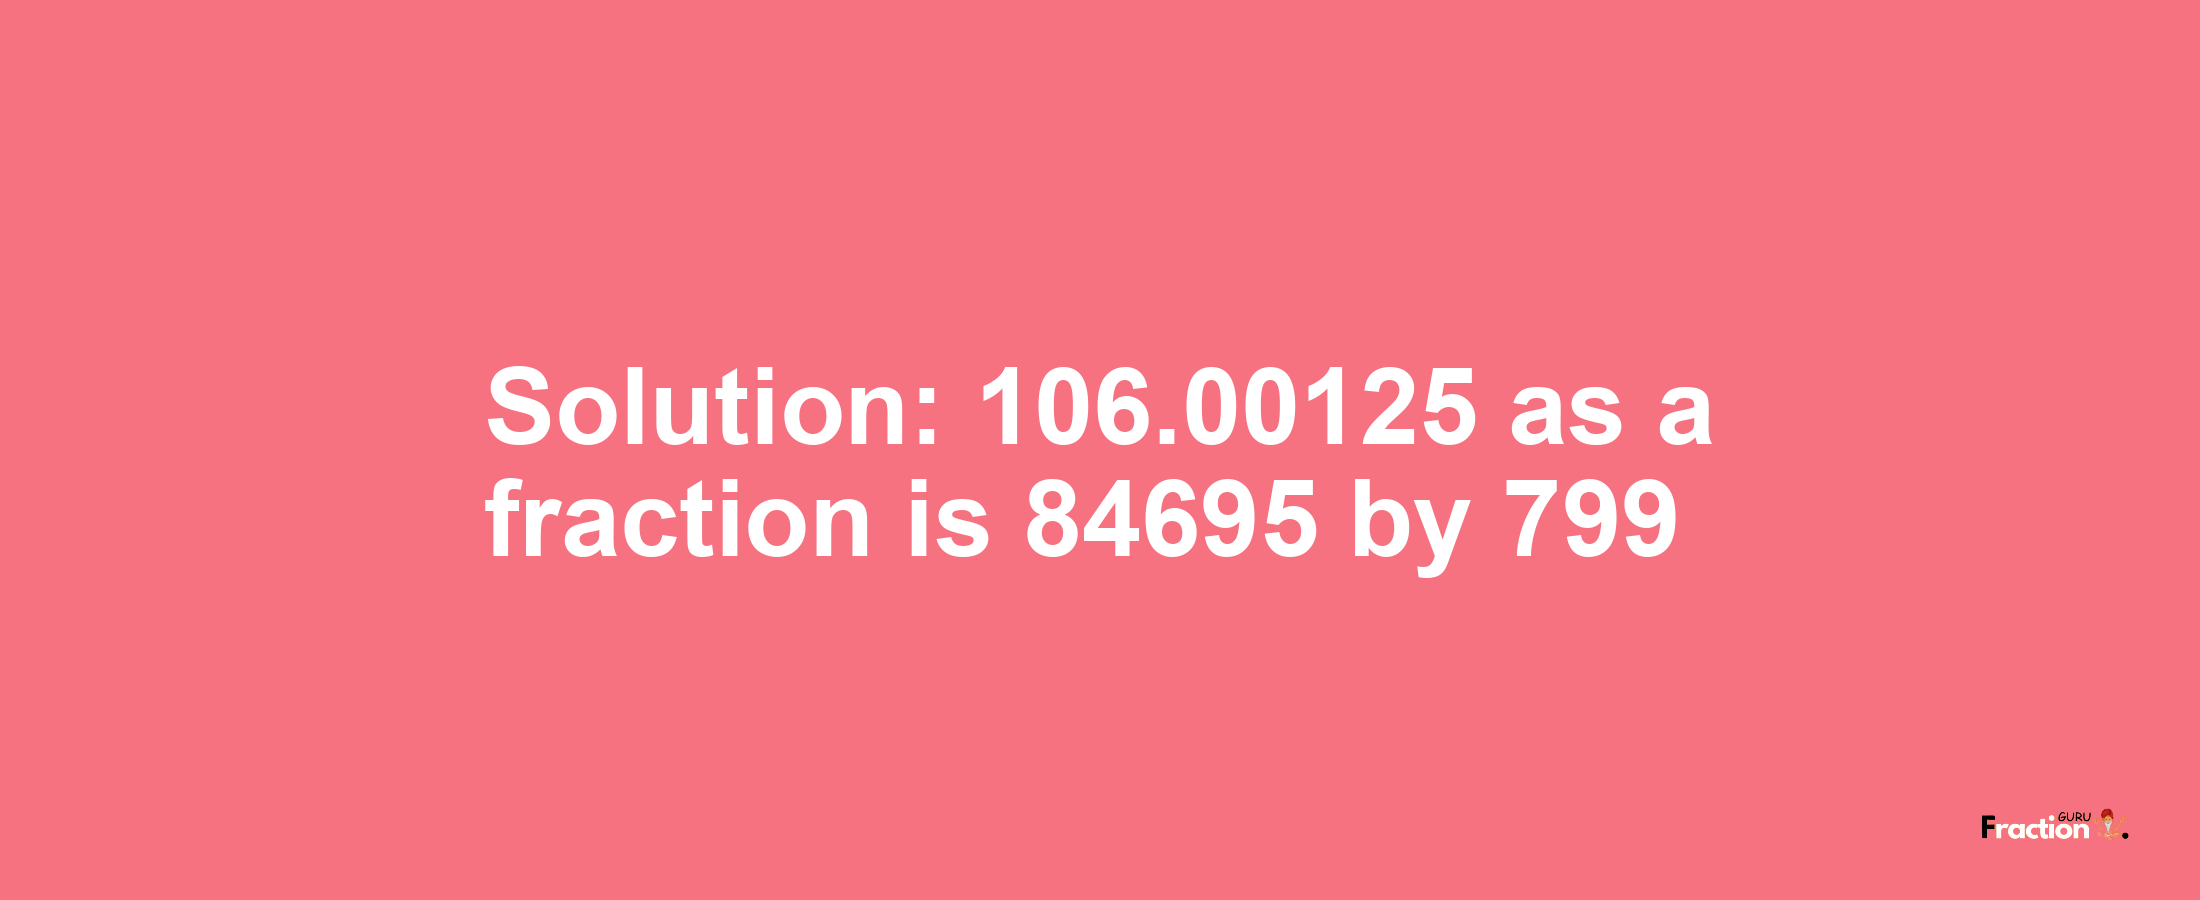 Solution:106.00125 as a fraction is 84695/799